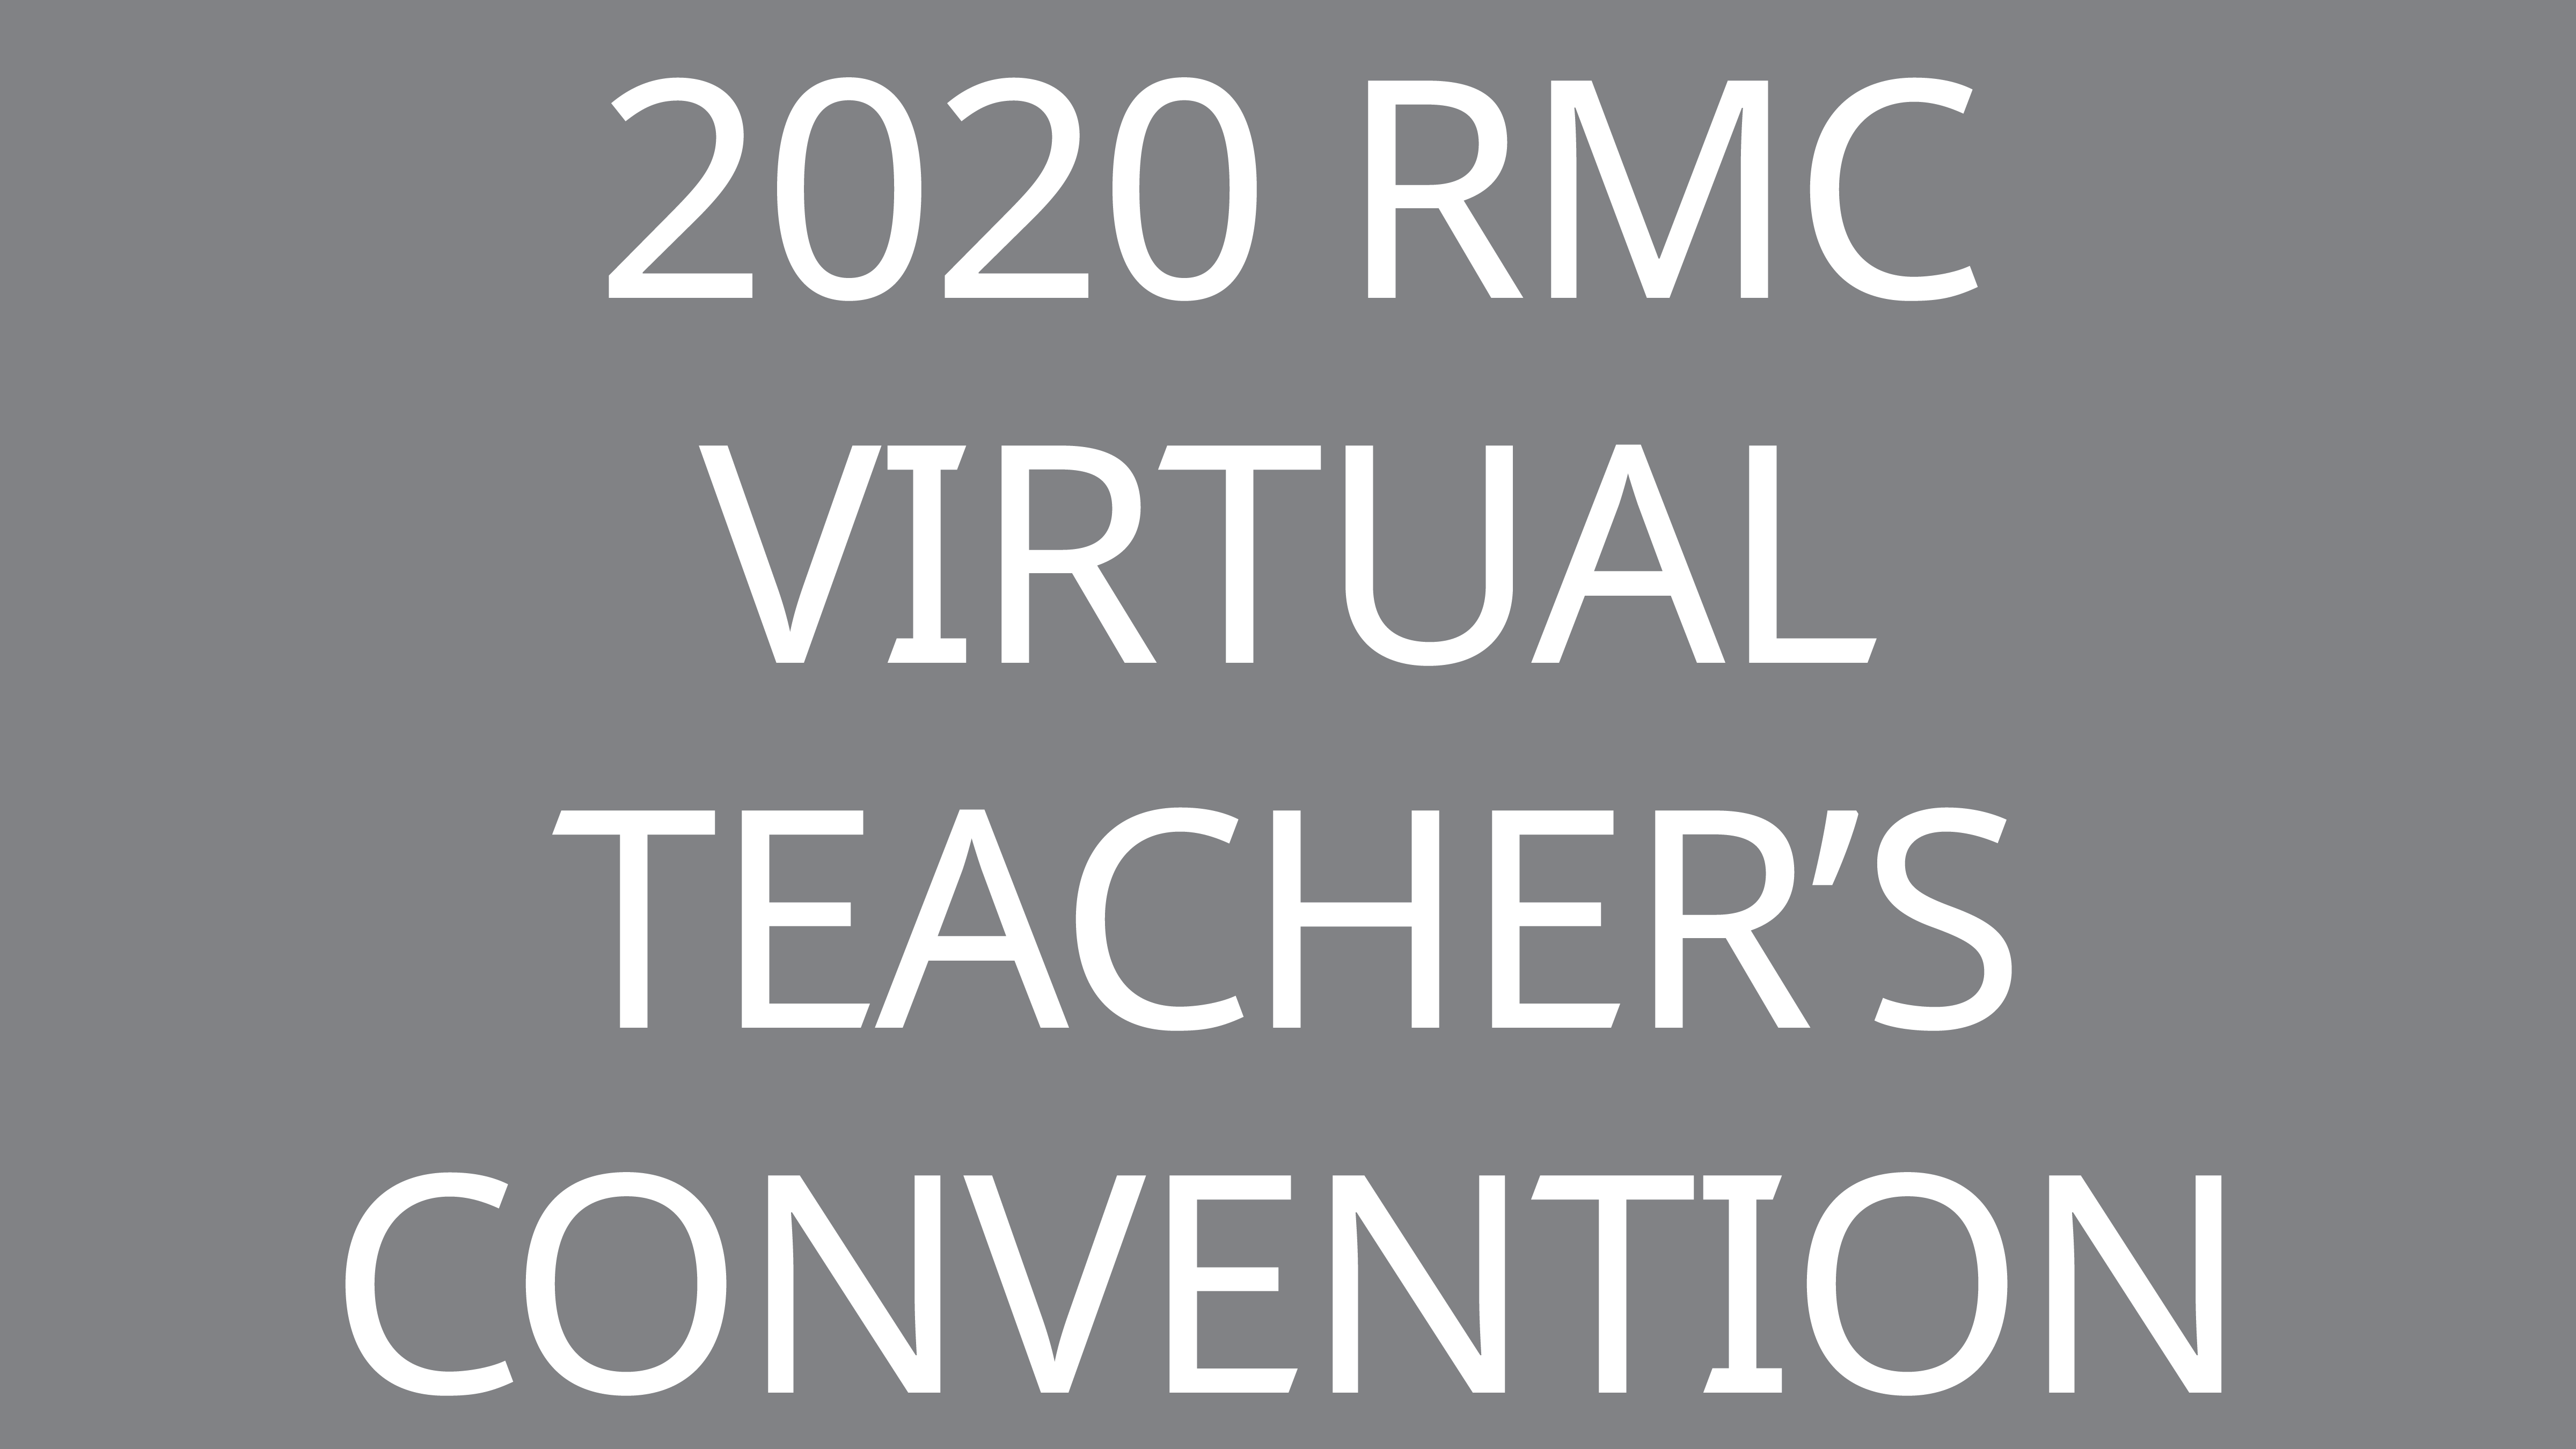 PANDEMIC CHALLENGES DISCUSSED AT RMC 2020 TEACHERS CONVENTION